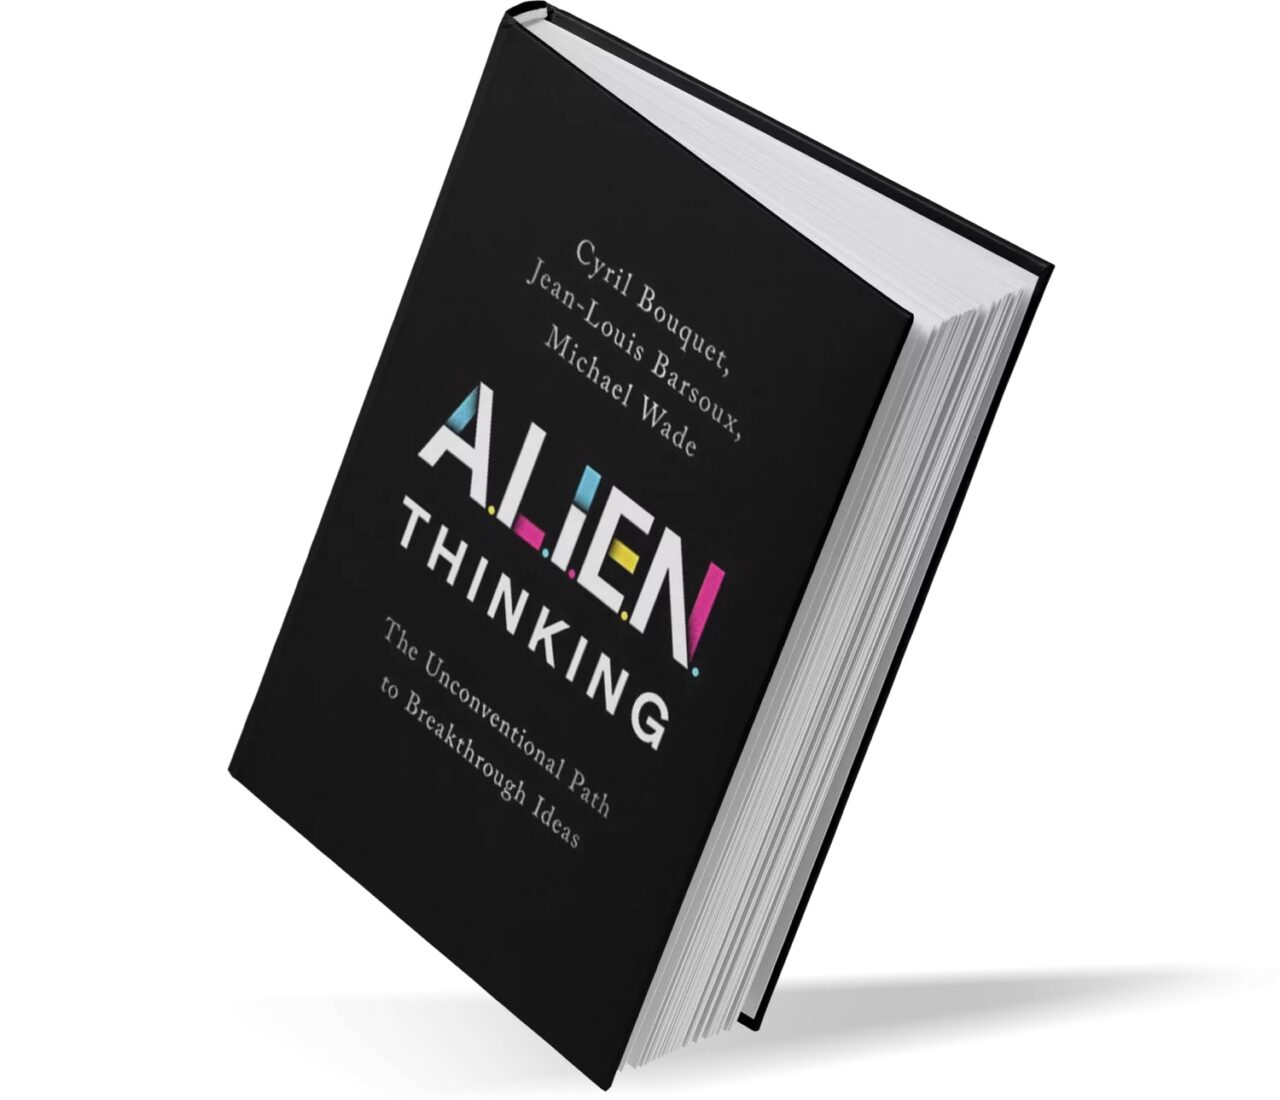 Alien-thinking-cover - IMD Business School